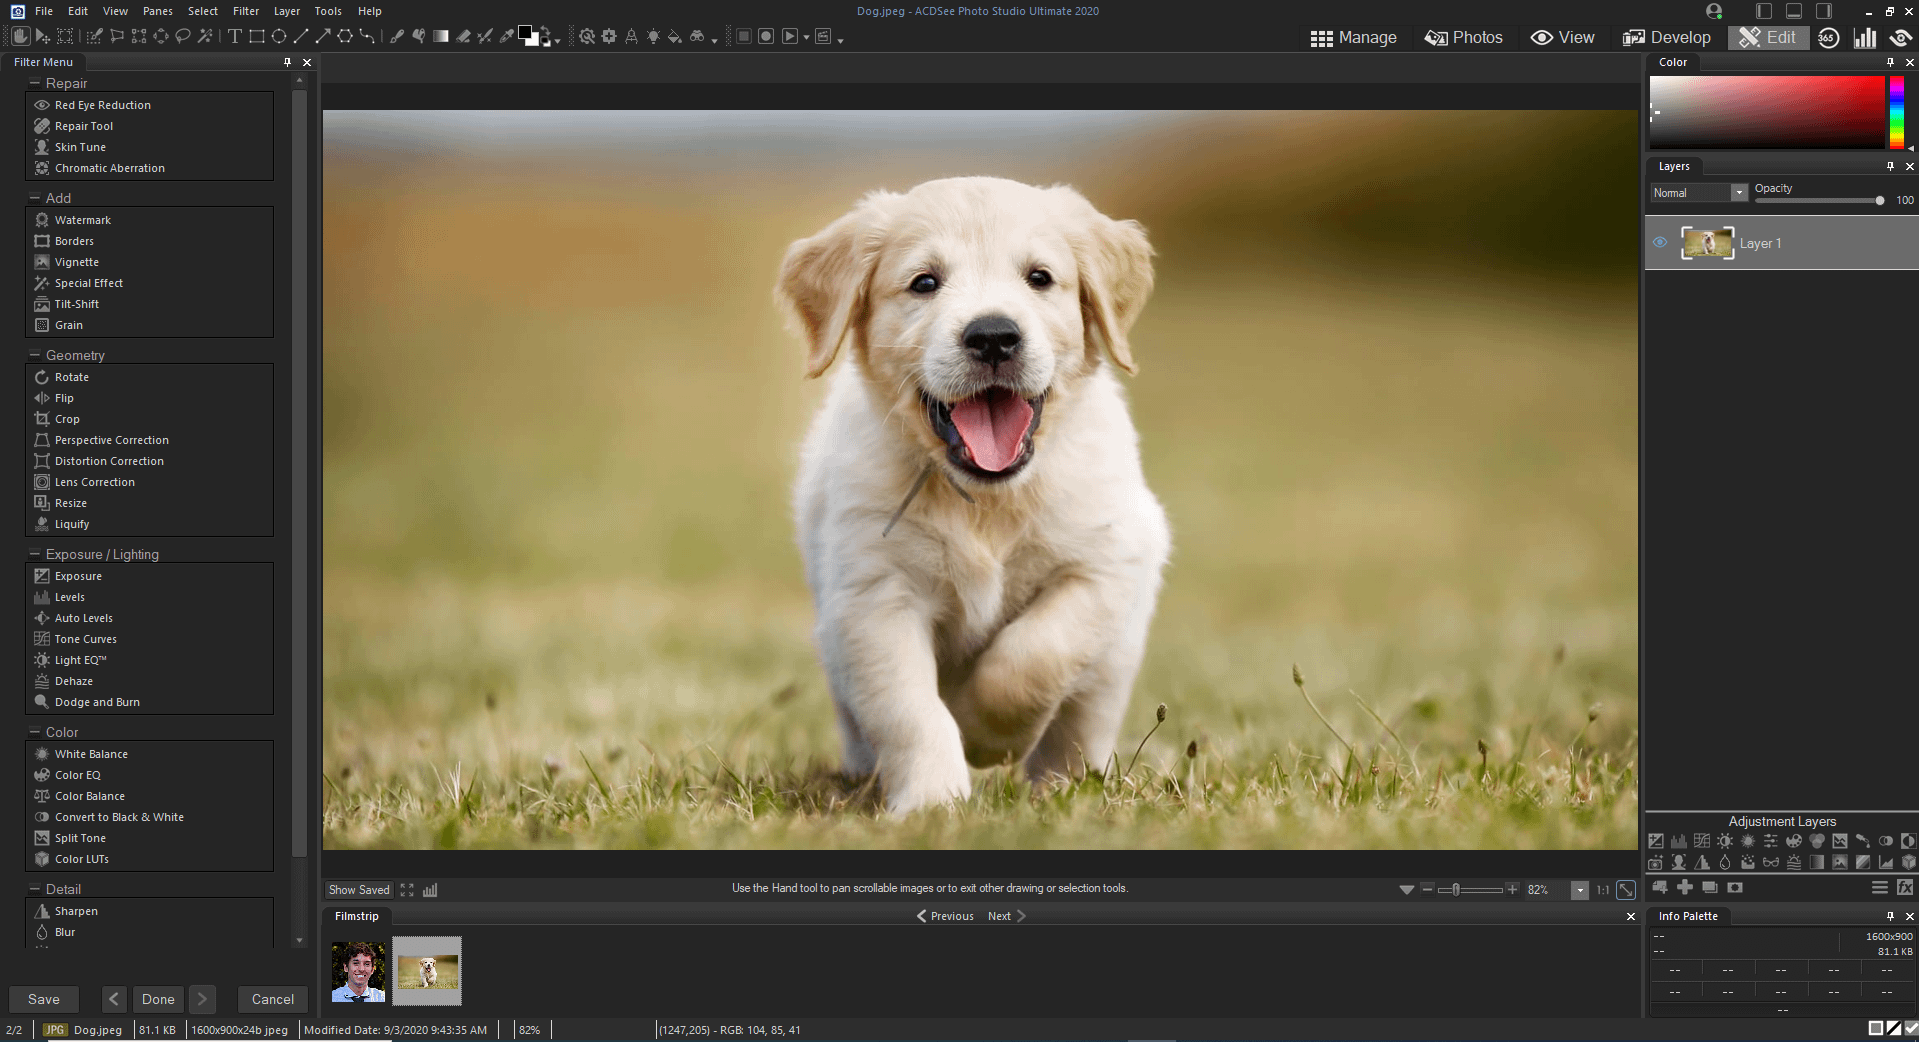 acdsee photo studio professional 2018 review